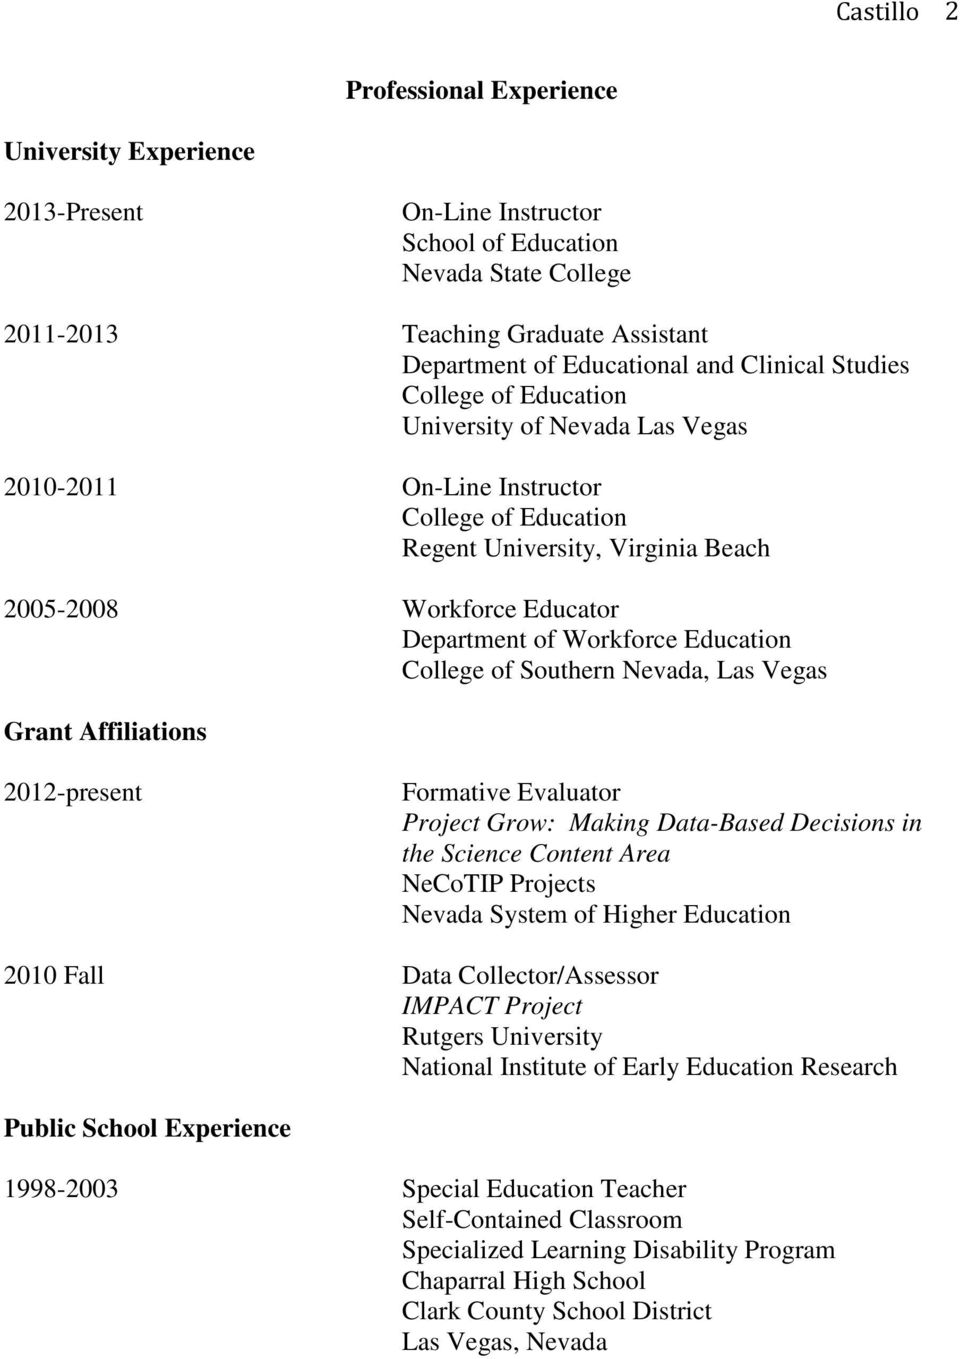 Education College of Southern Grant Affiliations 2012-present Formative Evaluator Project Grow: Making Data-Based Decisions in the Science Content Area NeCoTIP Projects Nevada System of Higher